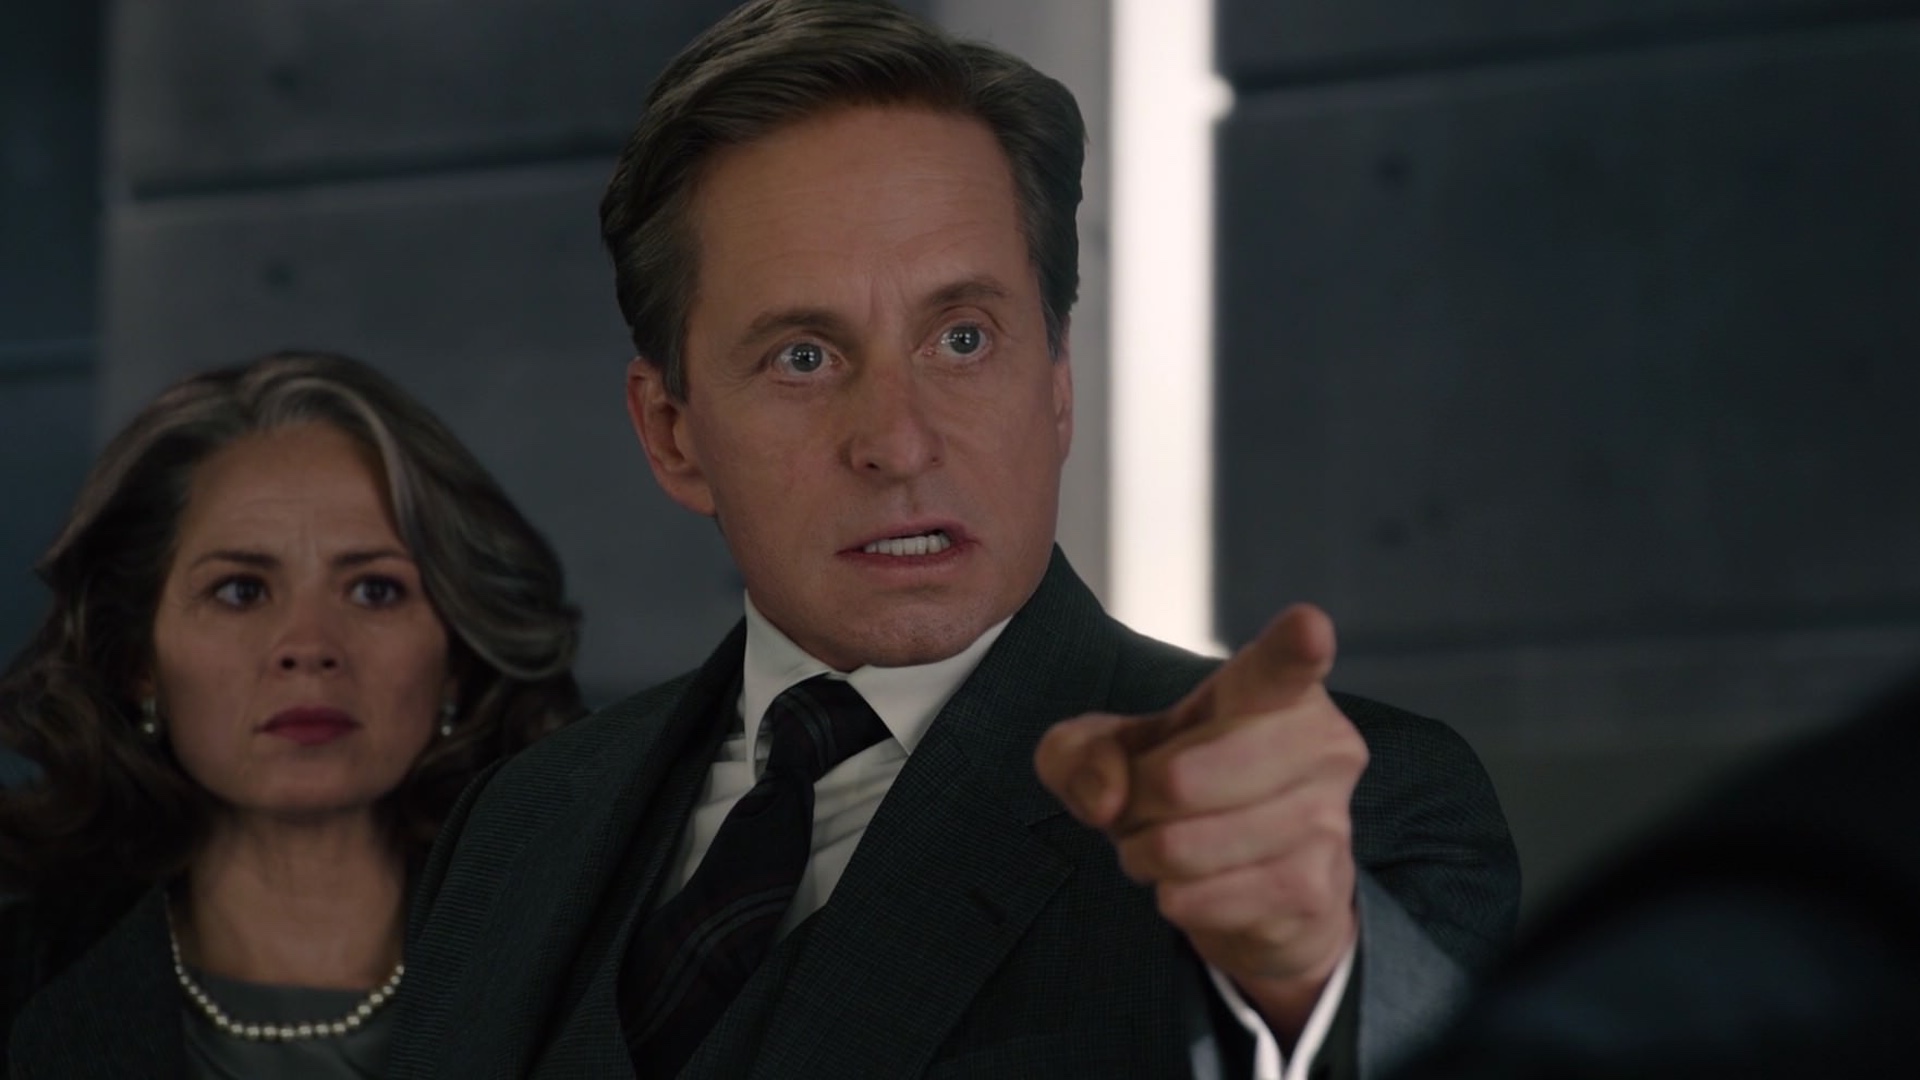 michael-douglas-wants-an-ant-man-prequel-film-that-focuses-on-the-adventures-of-a-younger-hank-pym-social.jpg